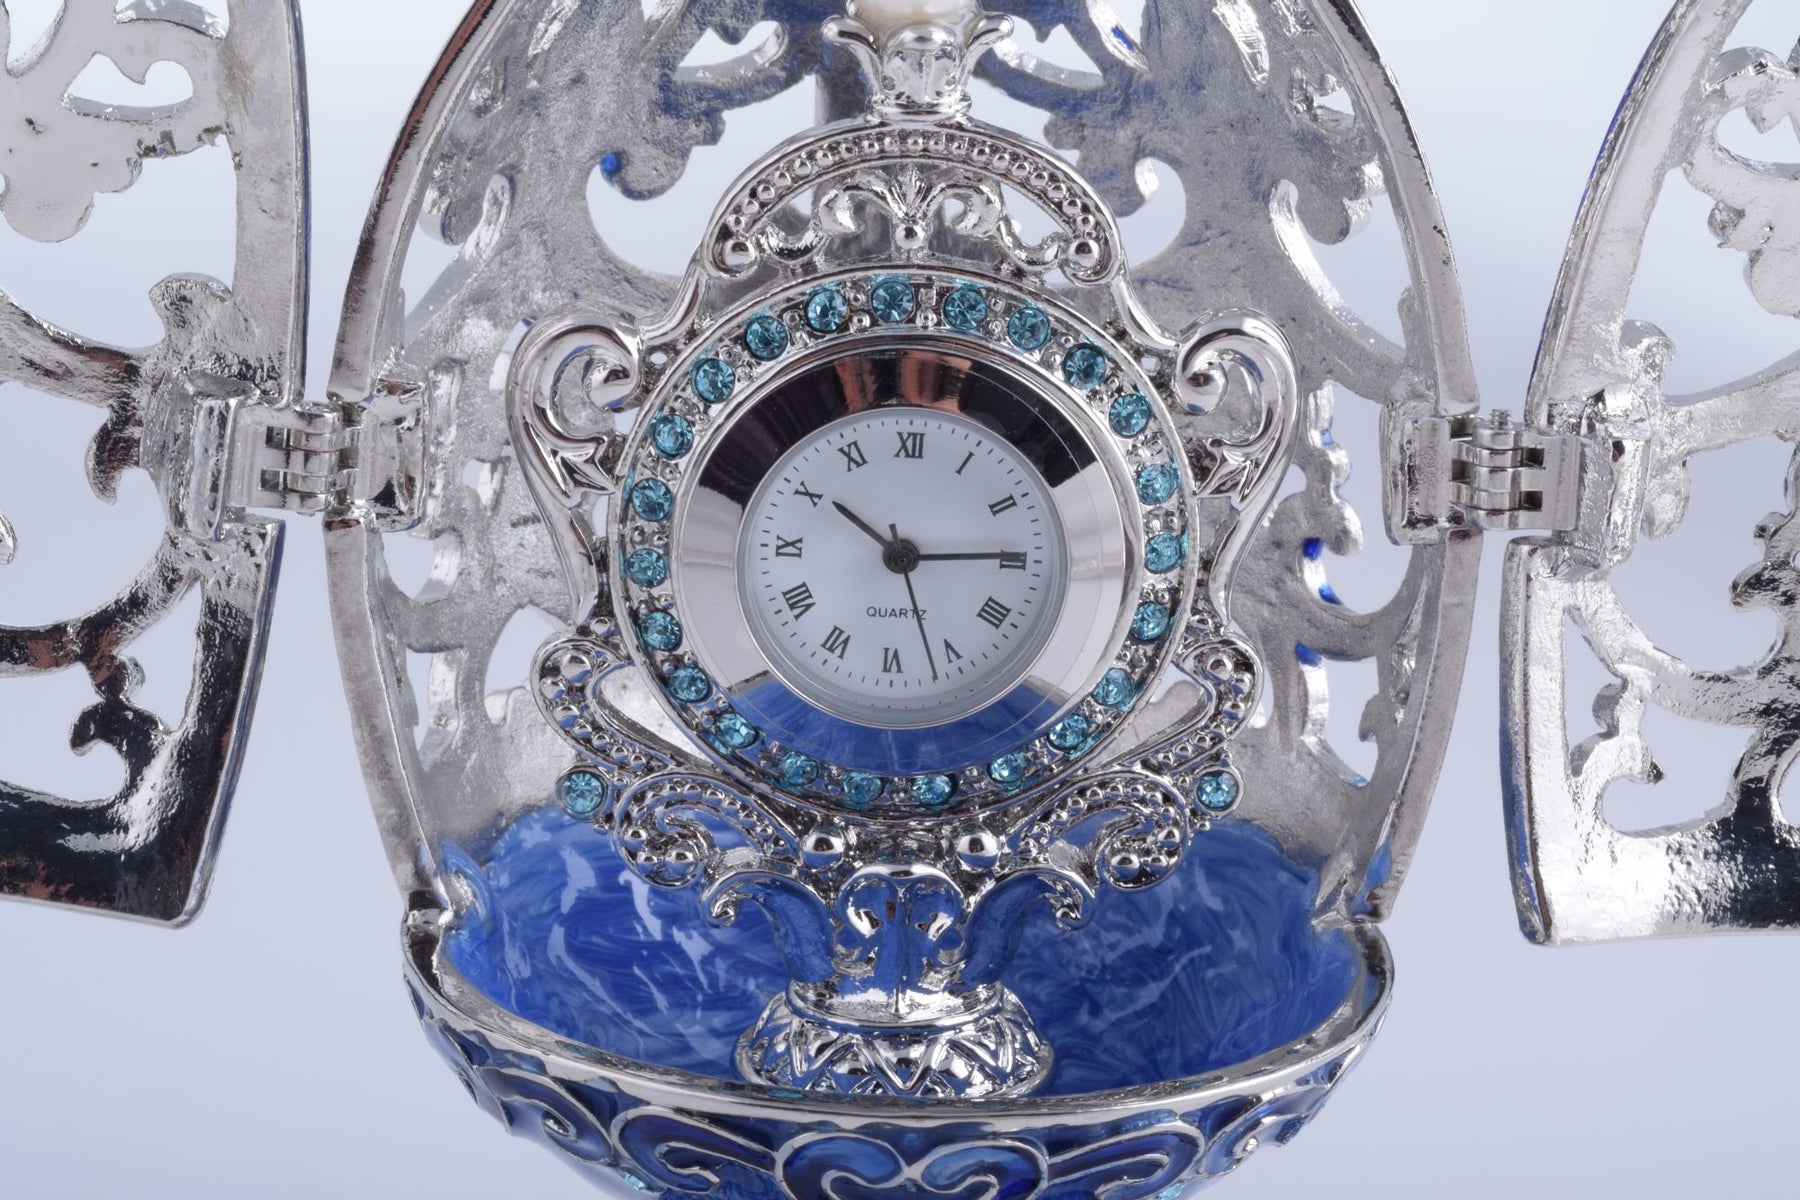 Silver & Blue Faberge Egg